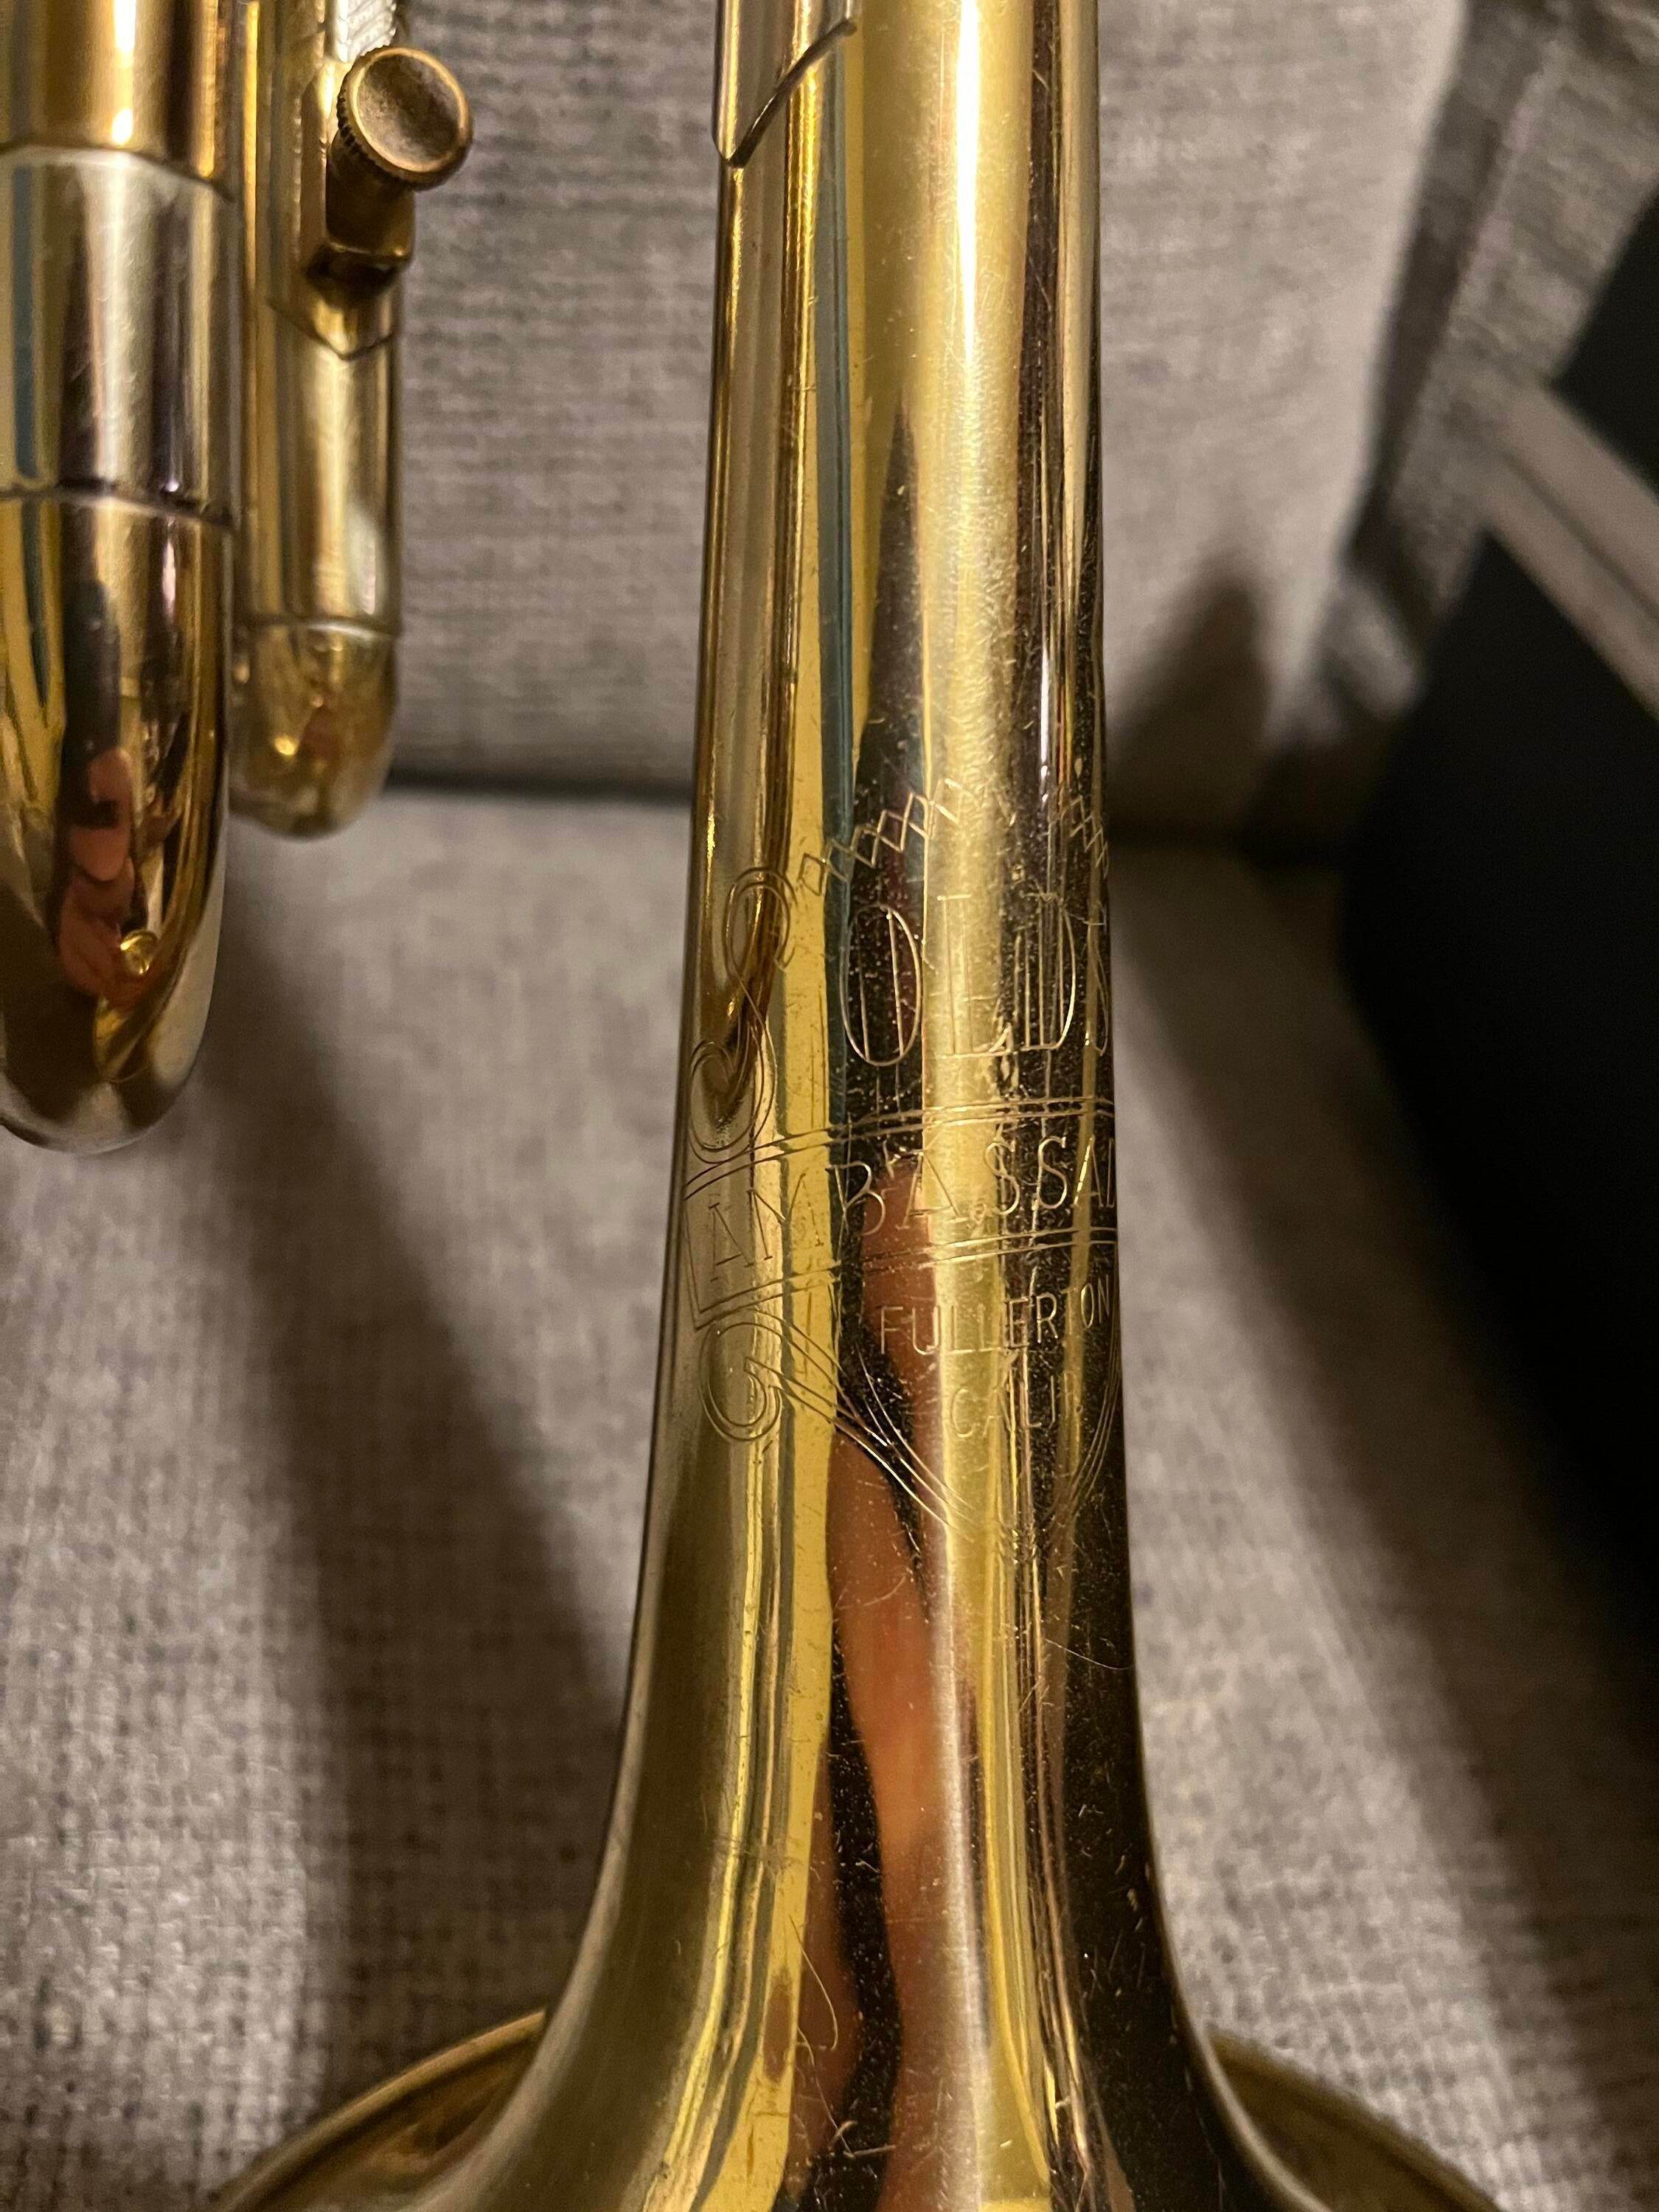 Used Olds Old trumpet - Sweetwater's Gear Exchange